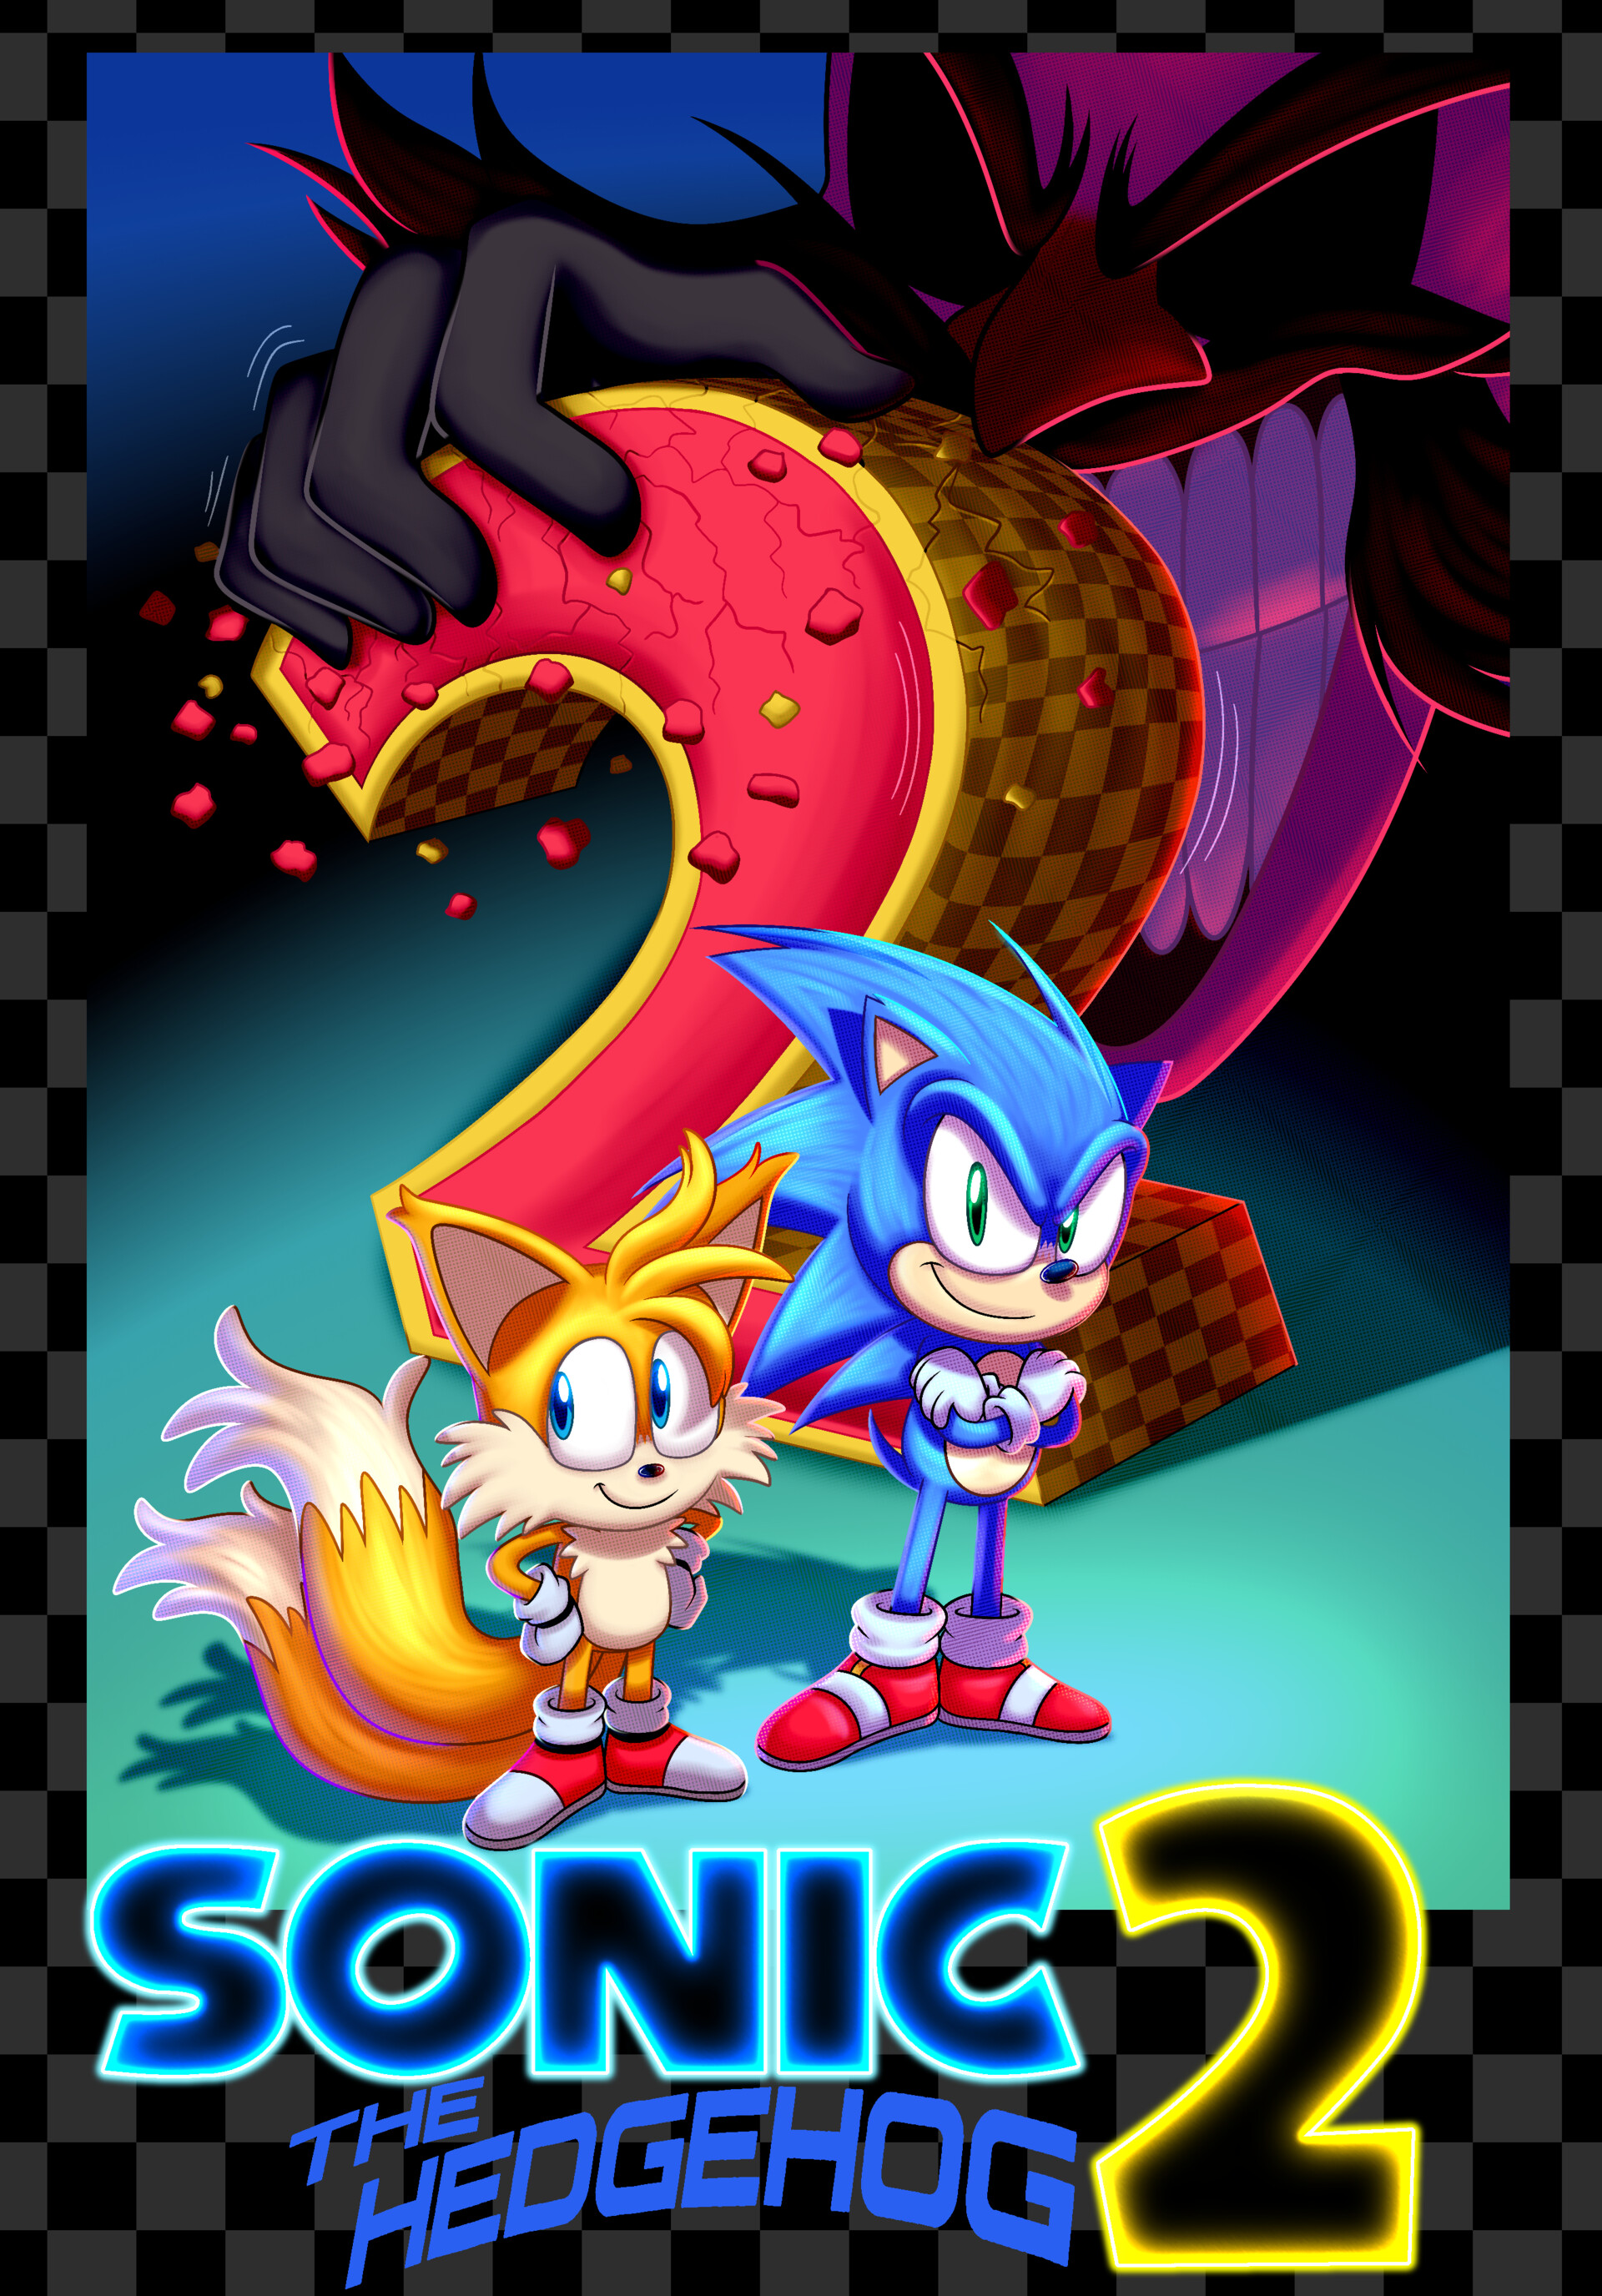 A Fan Made Sonic Movie 2 Poster - Sketchers United